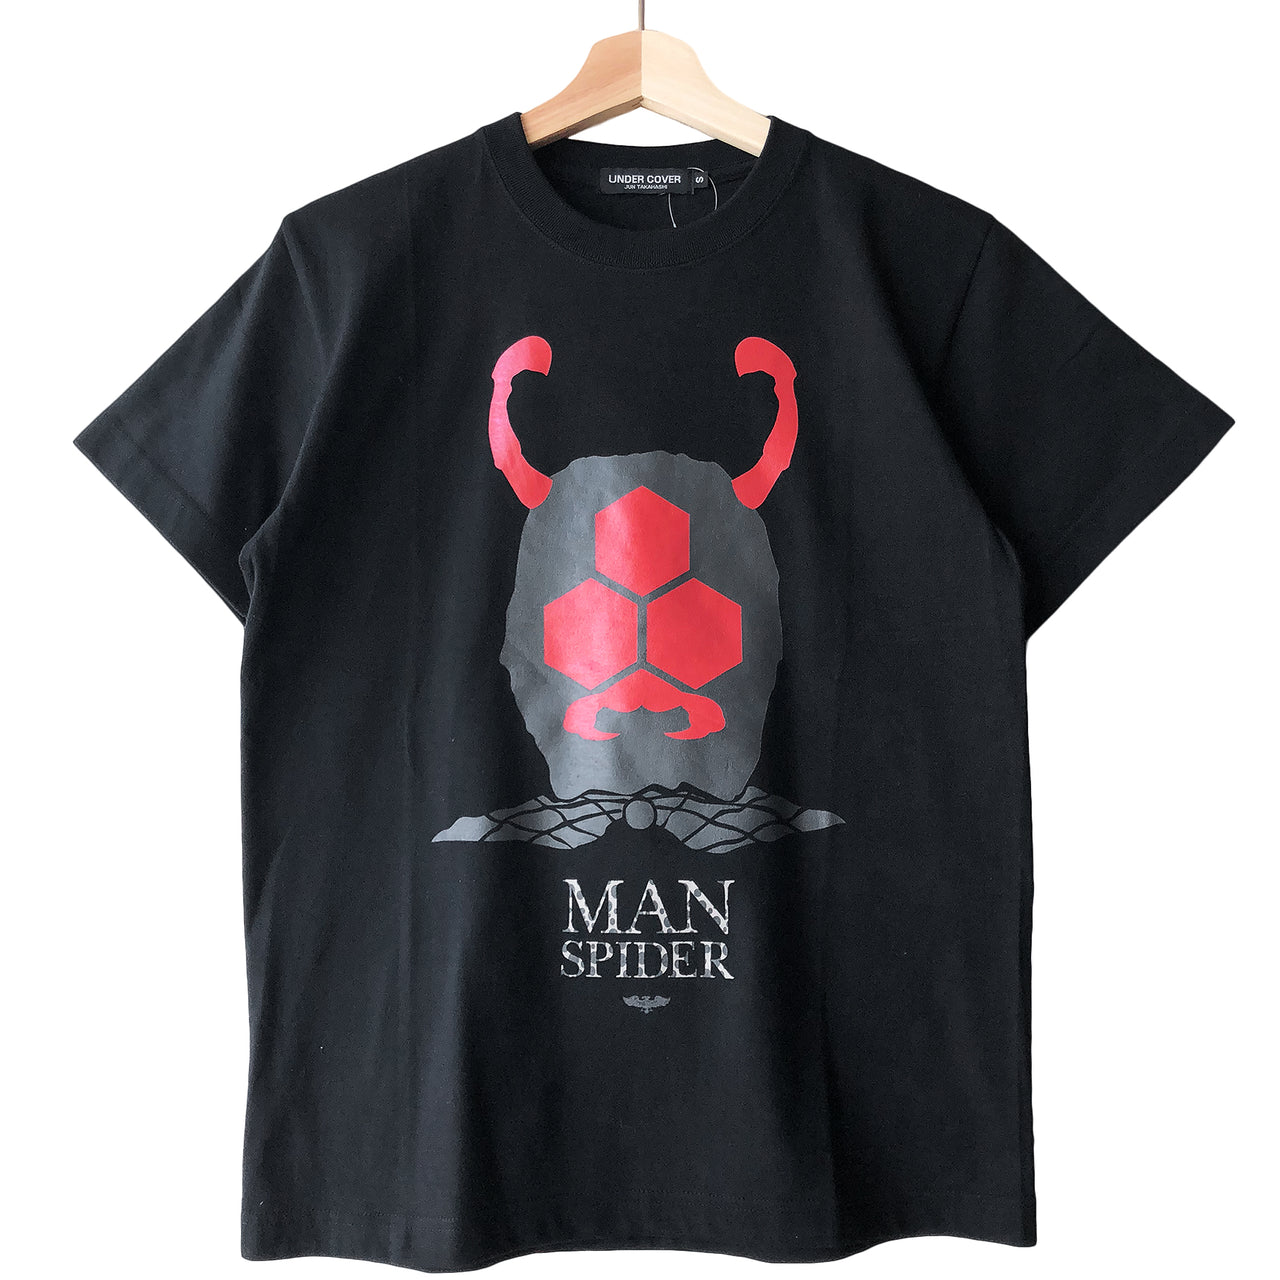 Undercover x Bandai Man Spider Tee - SS16